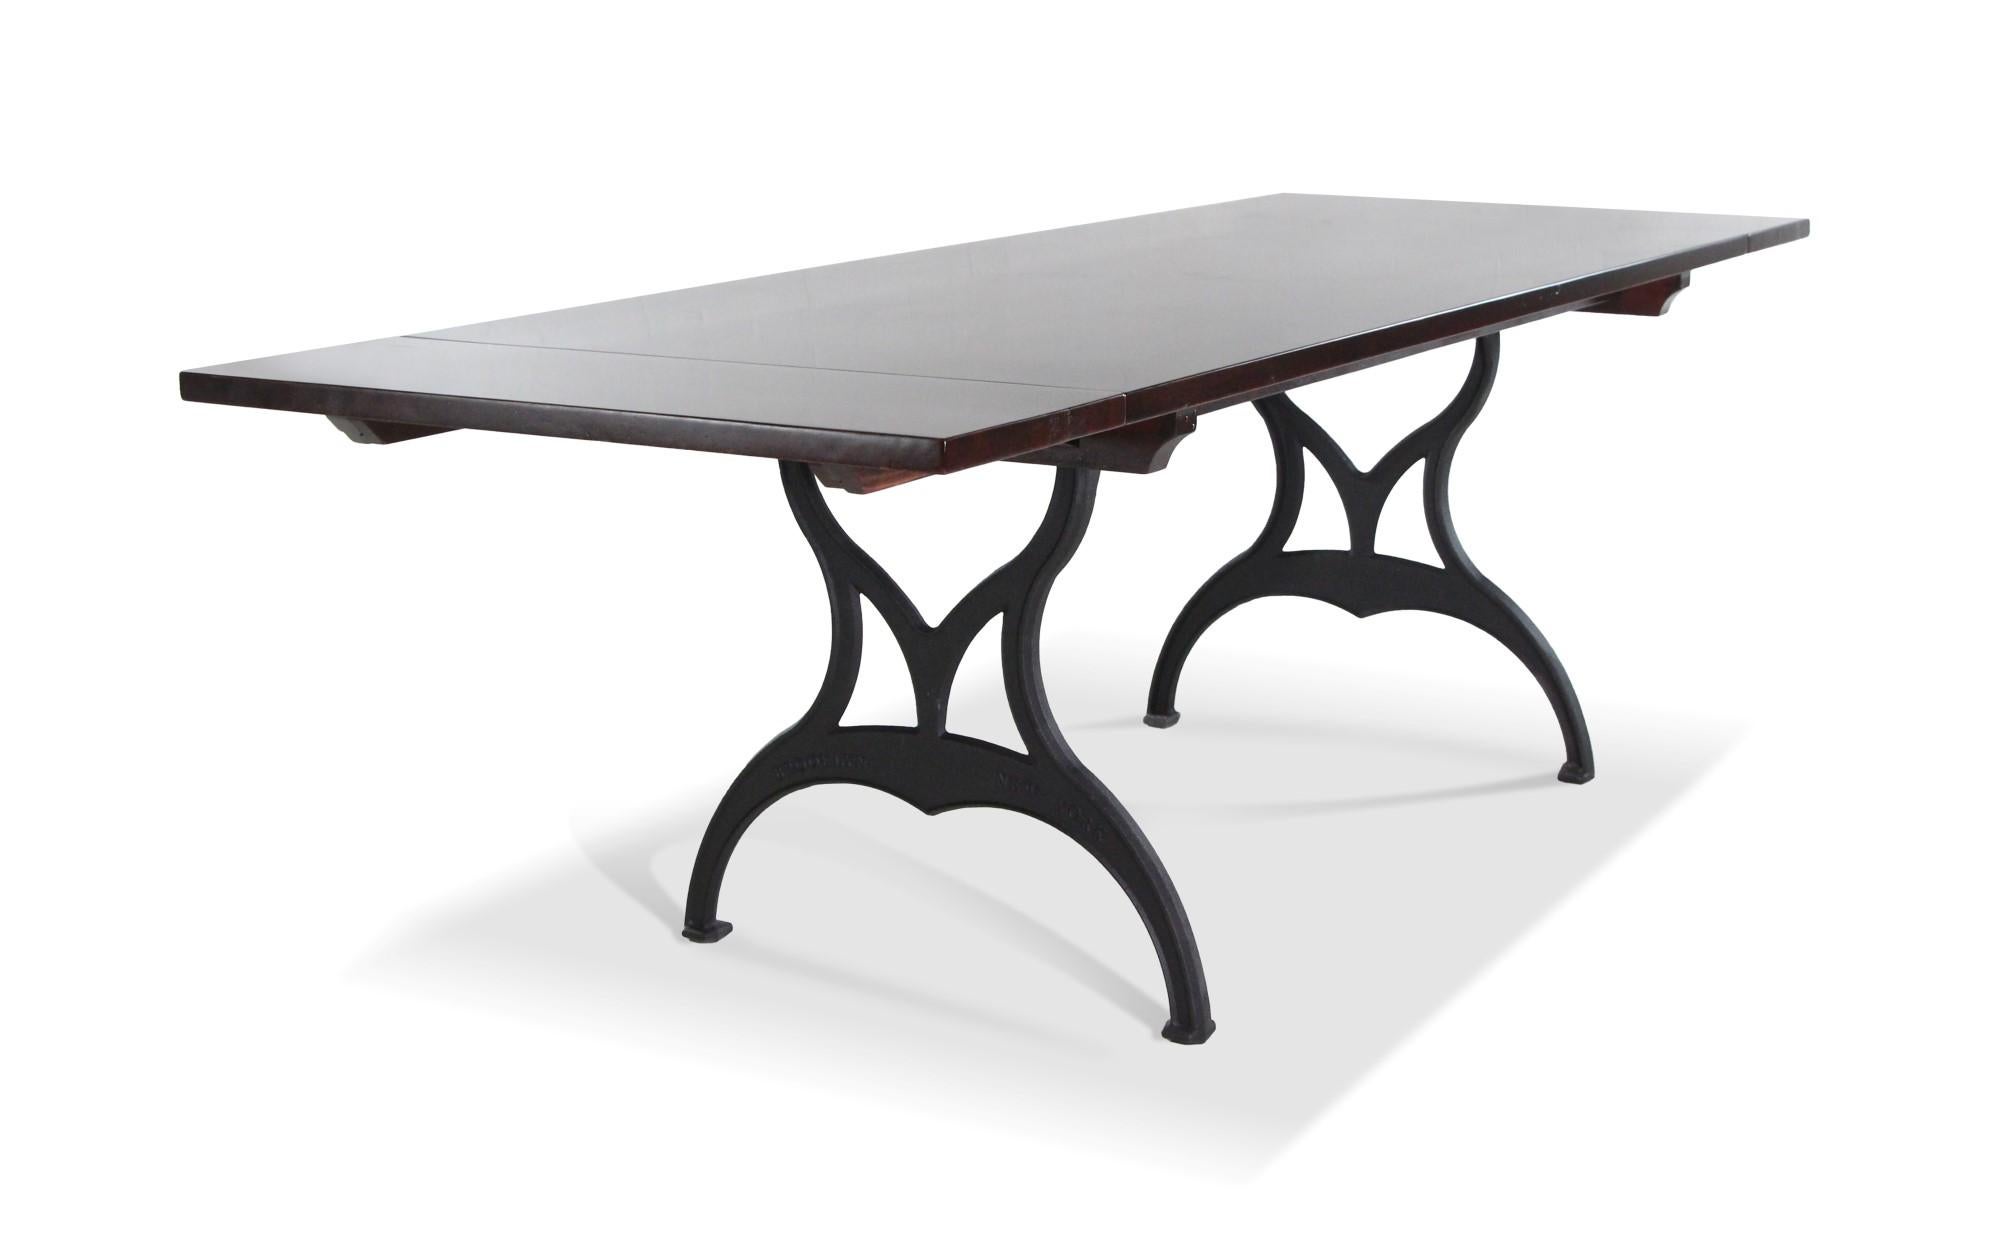 Made from reclaimed flooring and featuring two removable extensions,, this table is made from red mahogany stained apitong wood. Overall 95.5 in. L, without extensions or leaves 72 in. L x 35.75 in. W x 30.25 in. H, each extension is 11.75 in. L x